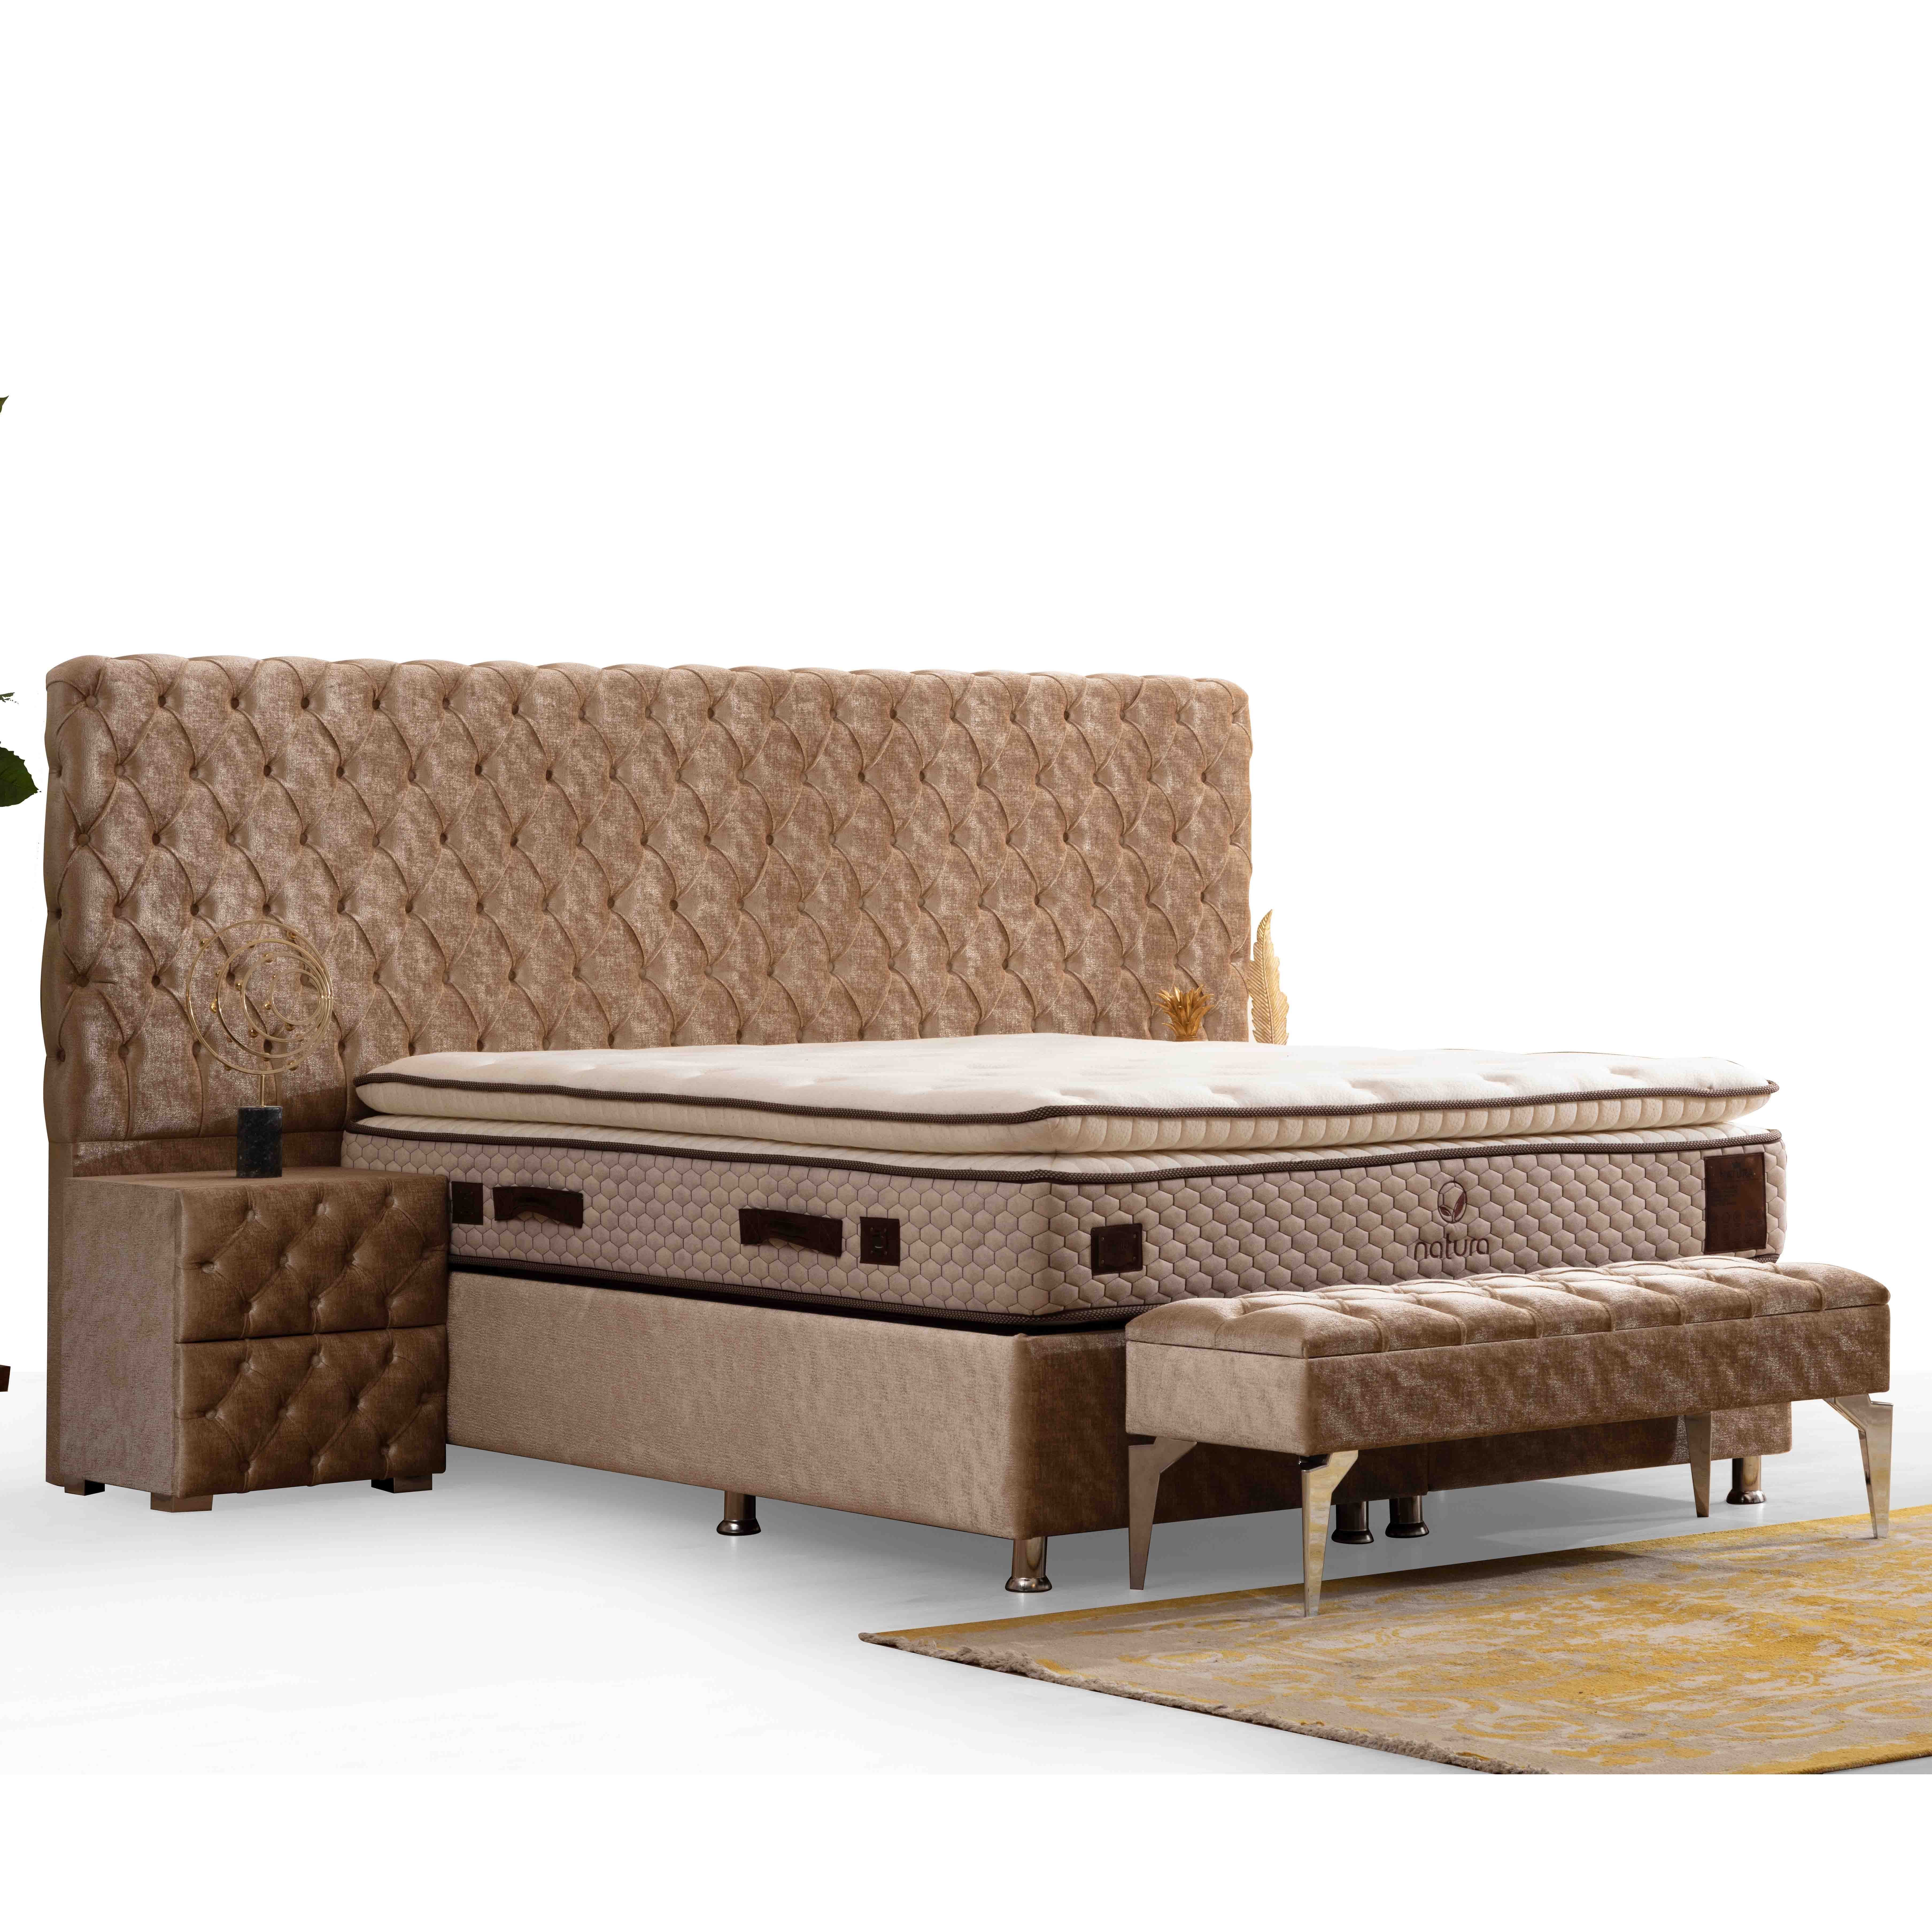 Siena Bed With Storage 160*200